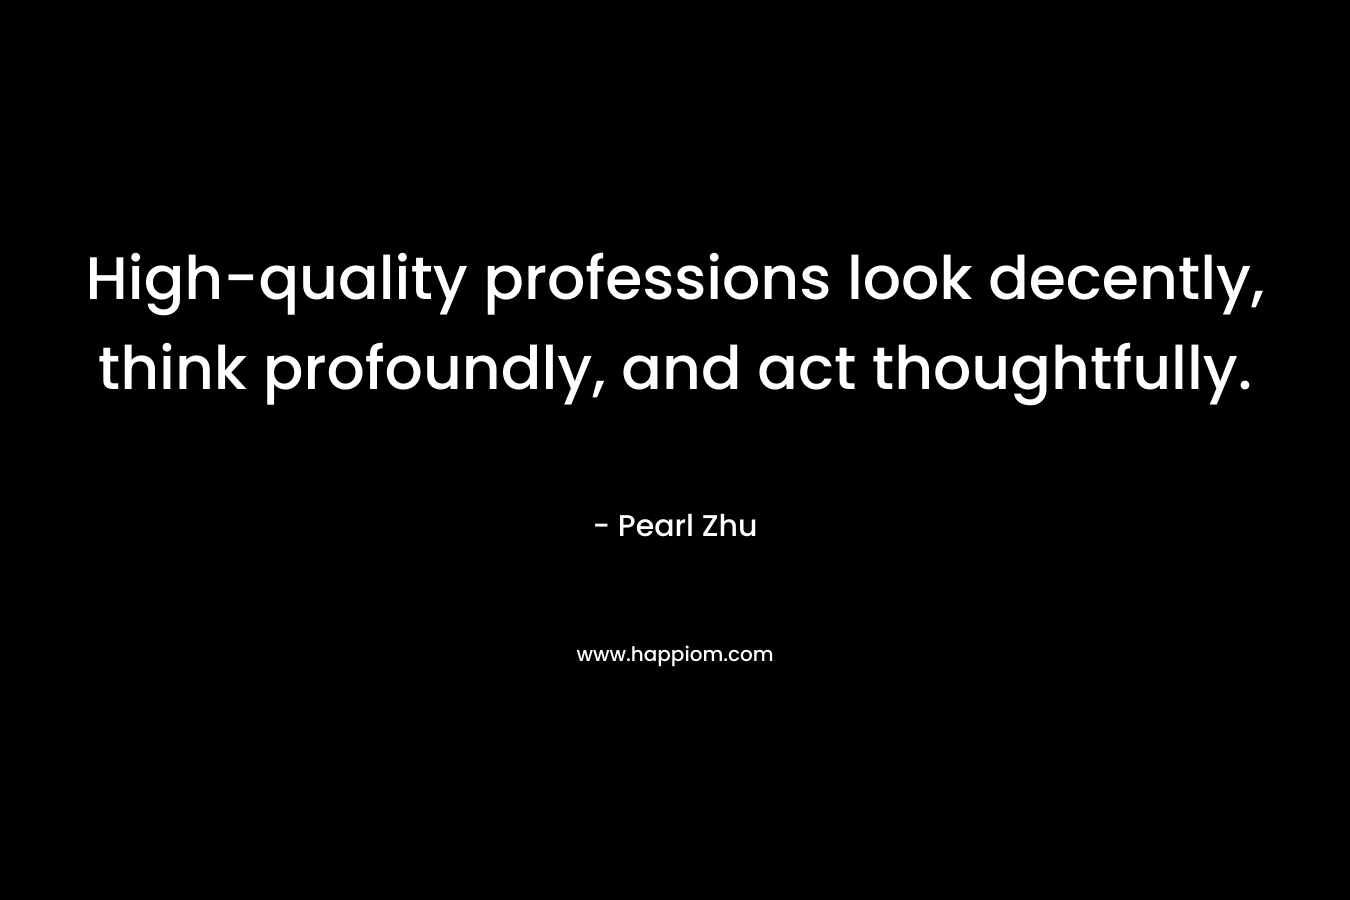 High-quality professions look decently, think profoundly, and act thoughtfully.